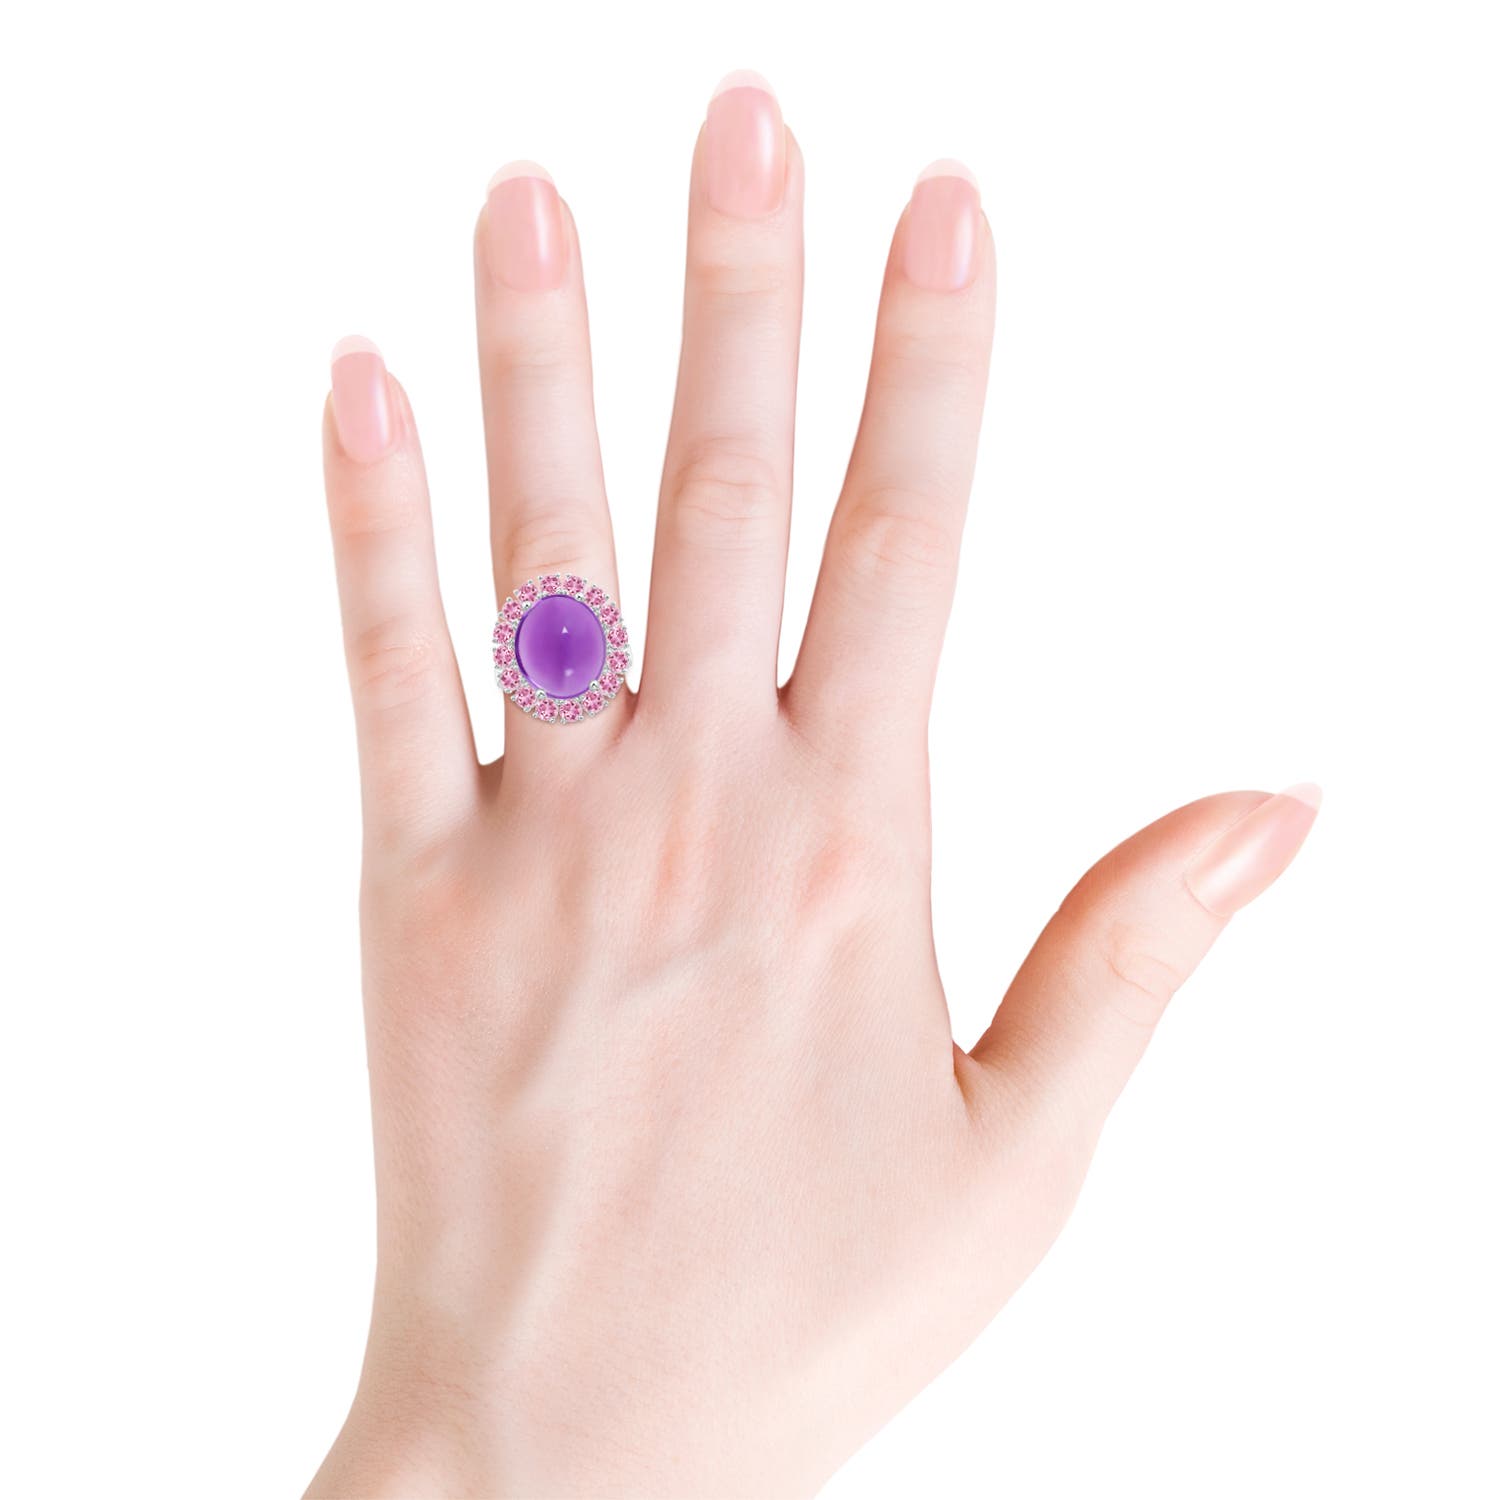 AA - Amethyst / 10.26 CT / 14 KT White Gold